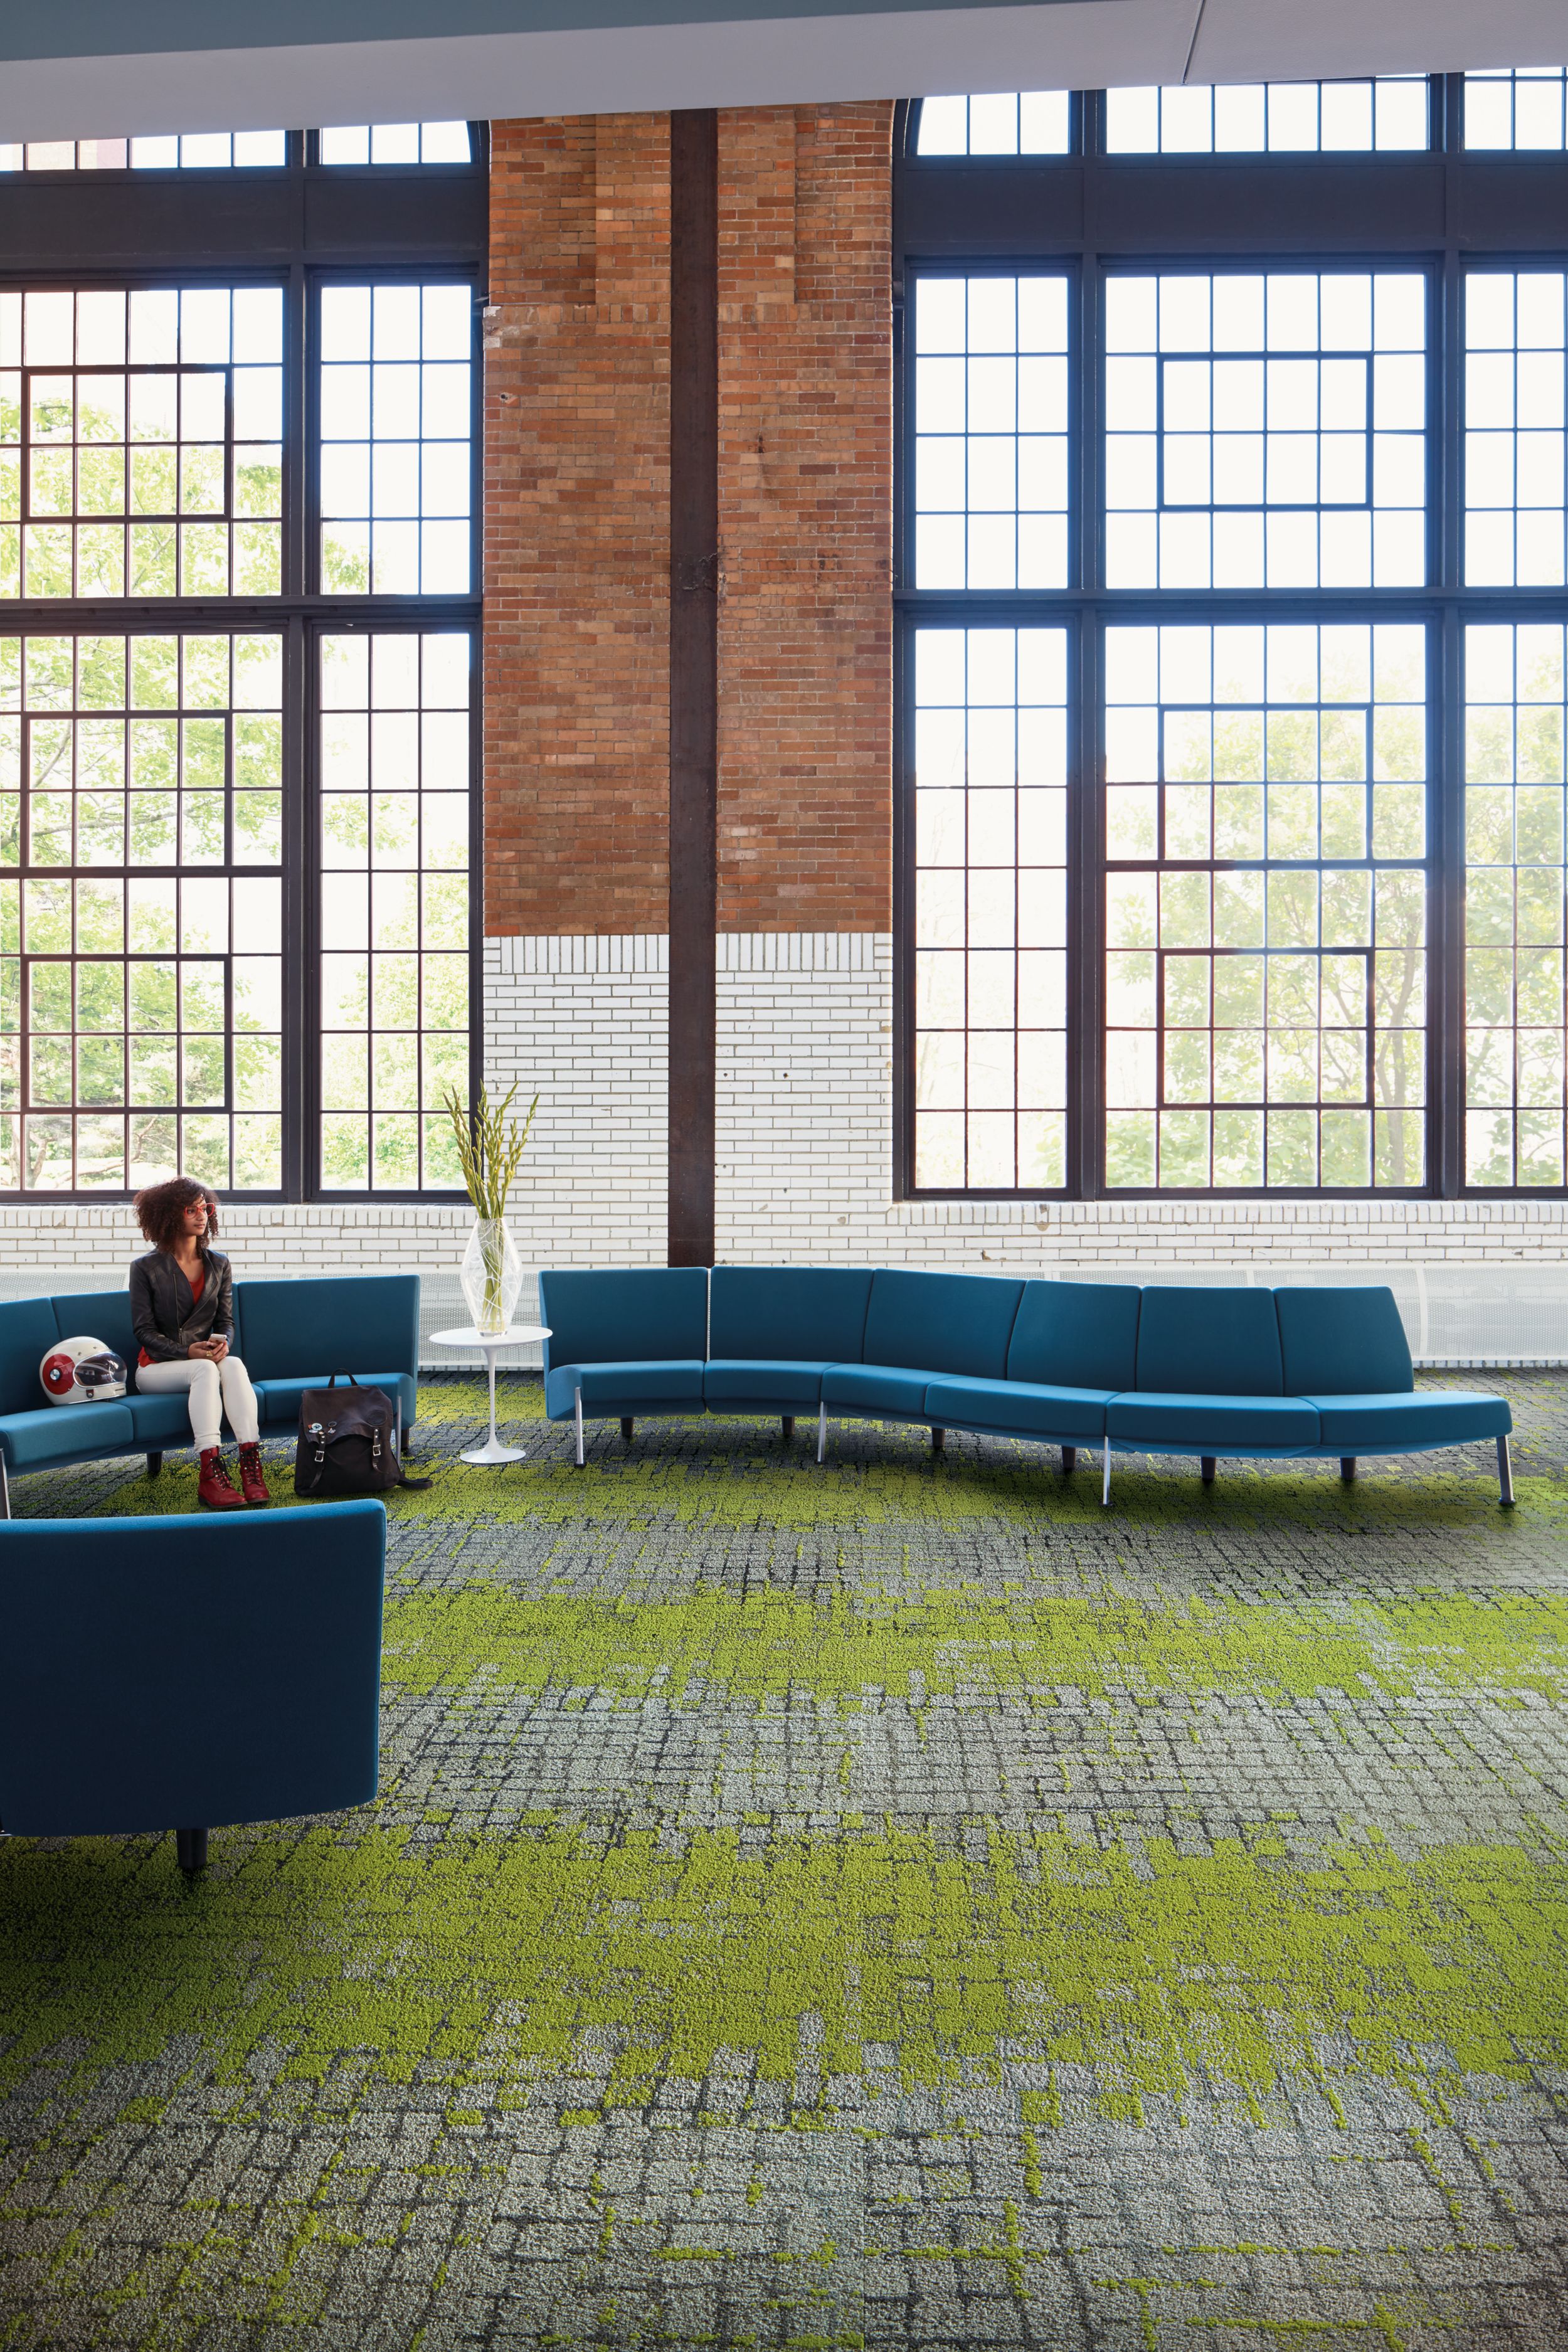 Interface Moss and Moss in Stone carpet tile in seating area with blue couches and women seated afbeeldingnummer 4